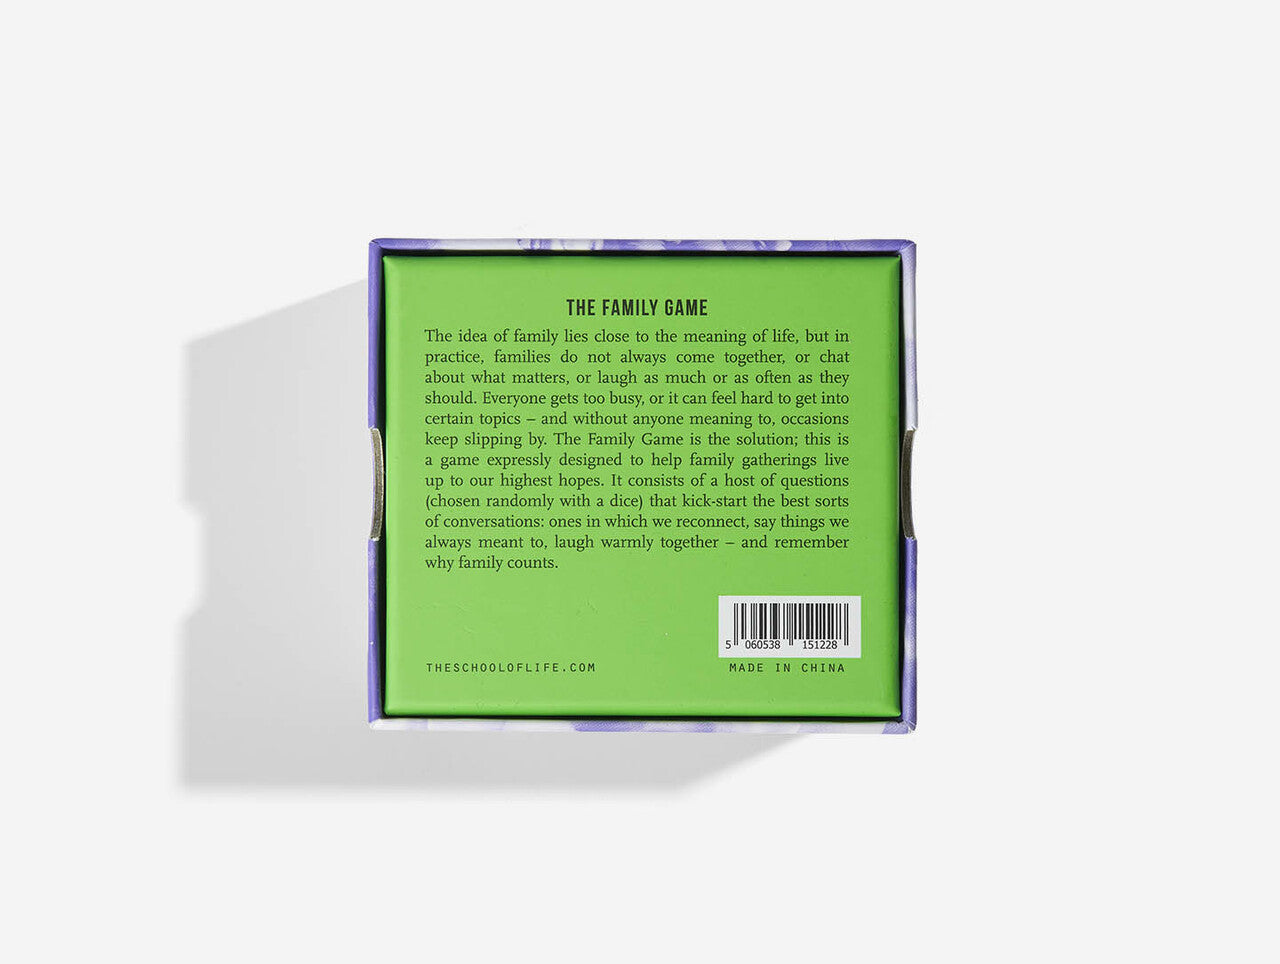 Back cover of a game box explaining 'The Family Game'